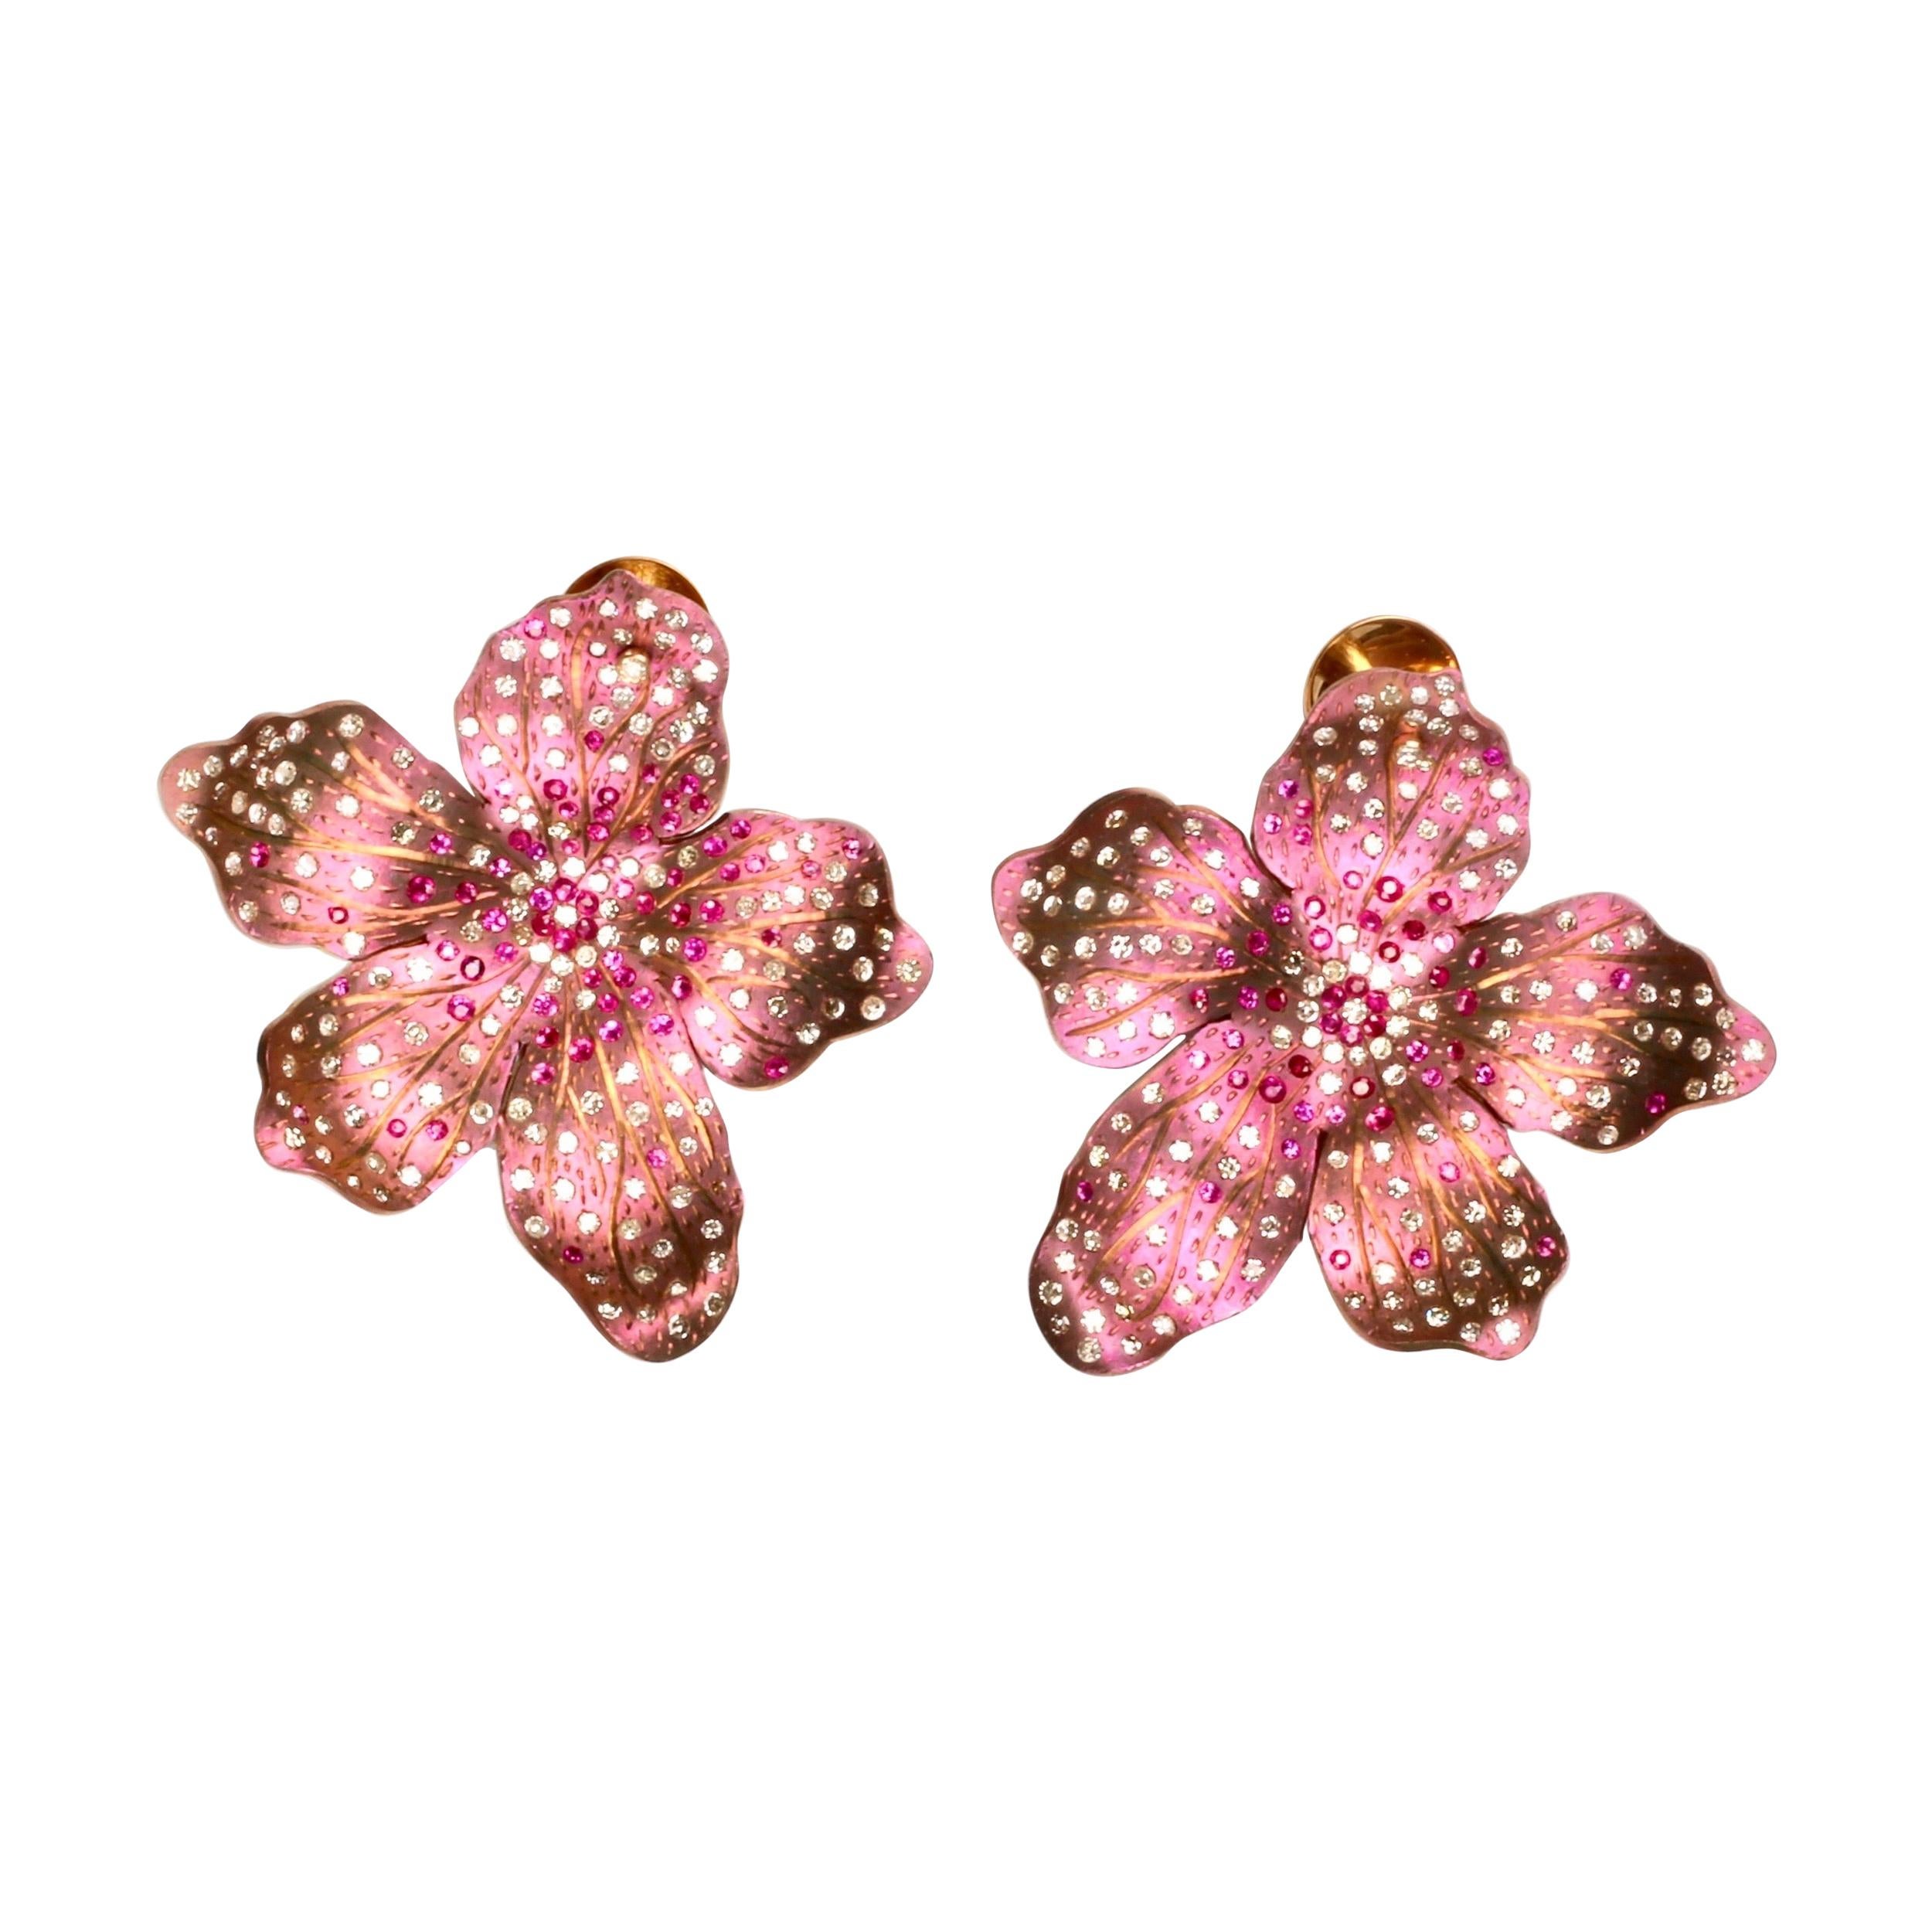 Periwinkle Titanium Earrings with Rubies and Diamonds 18kt Gold